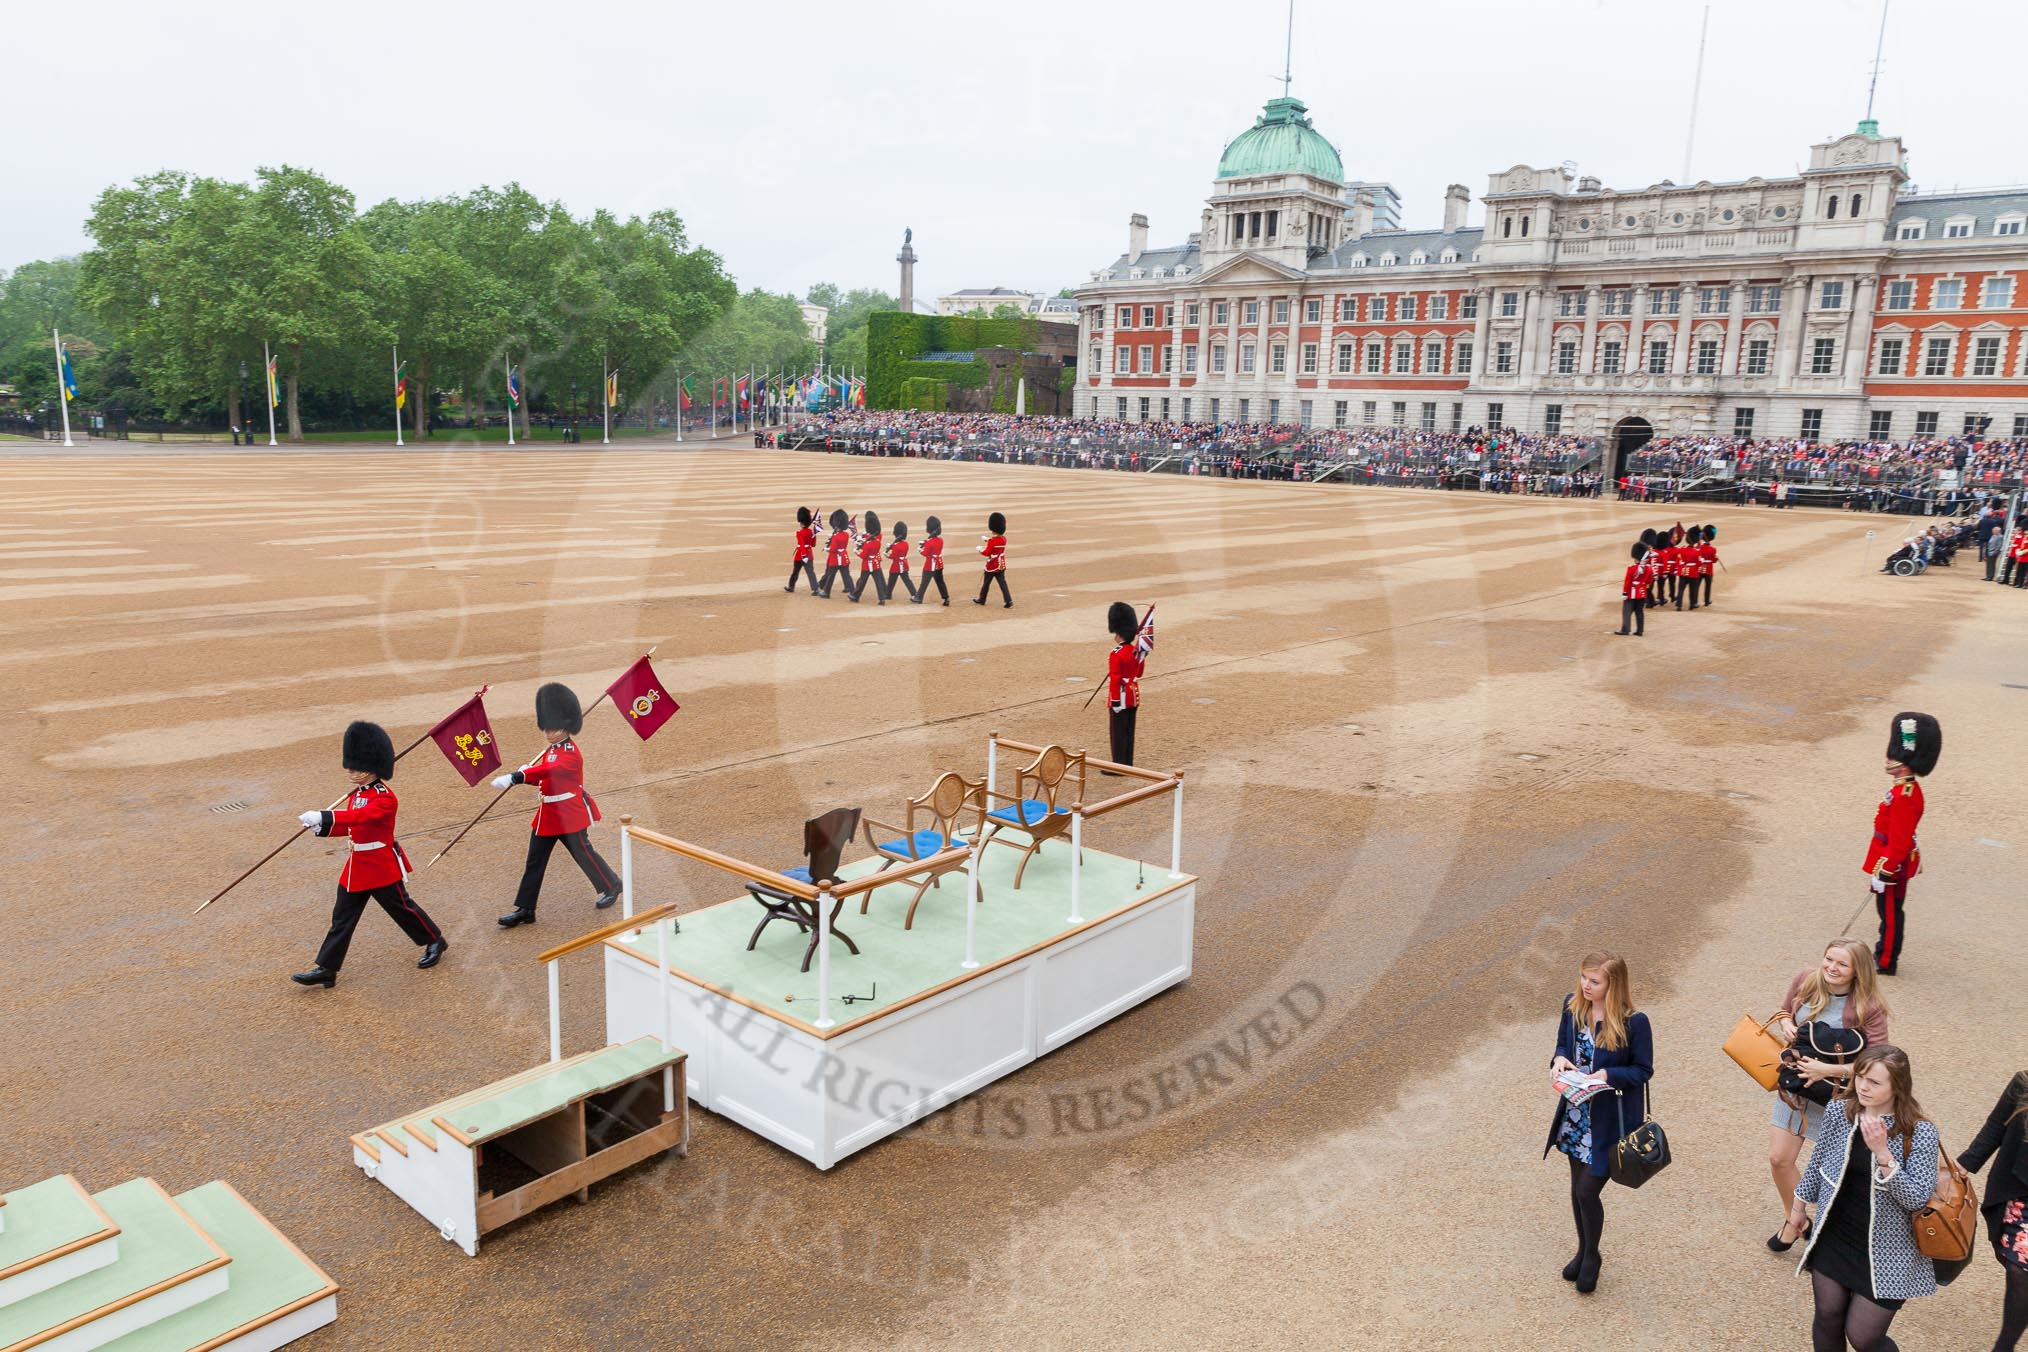 The Colonel's Review 2016.
Horse Guards Parade, Westminster,
London,

United Kingdom,
on 04 June 2016 at 10:18, image #47